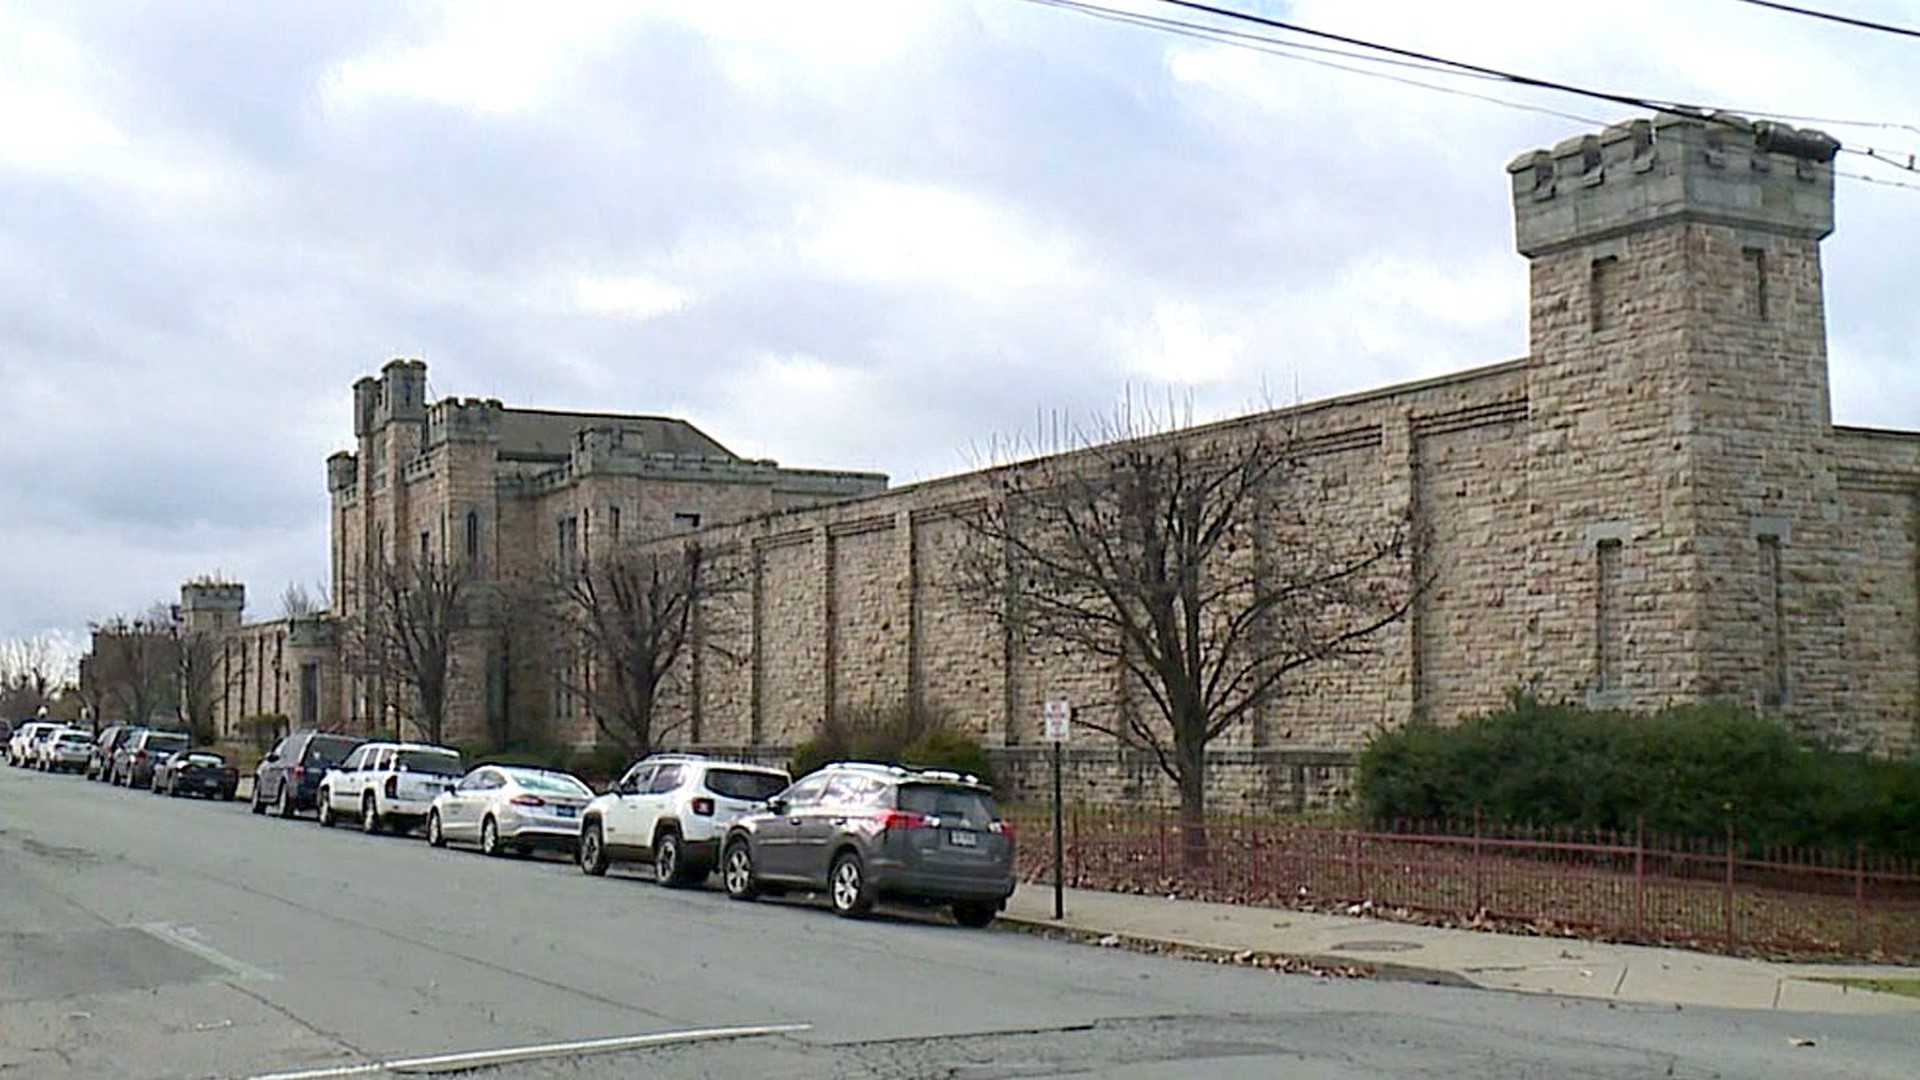 Man incorrectly released from prison picked up in Scranton